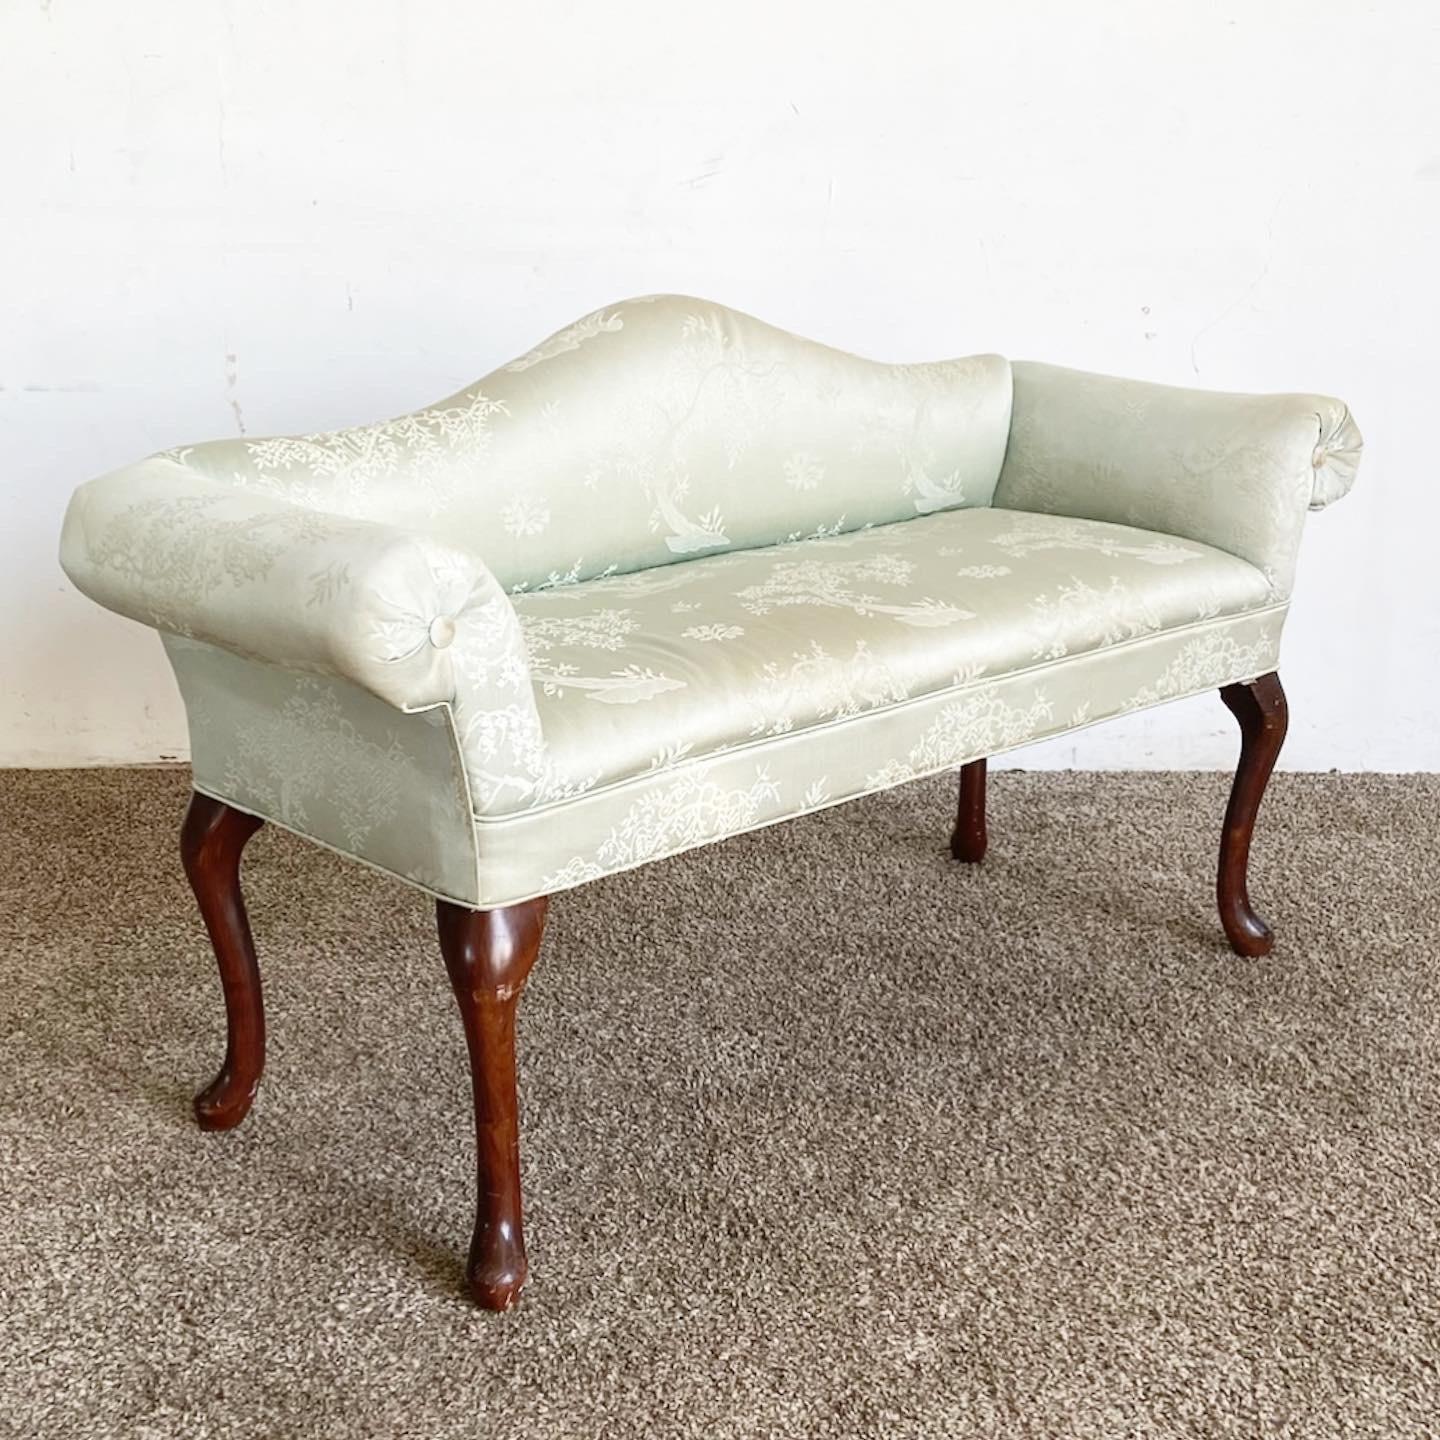 Experience classic elegance with our French Provincial Green Fabric Bench/Settee, blending soft upholstery with a timeless design for a sophisticated seating solution.

Features soft, plush upholstery in a soothing green tone for an elegant